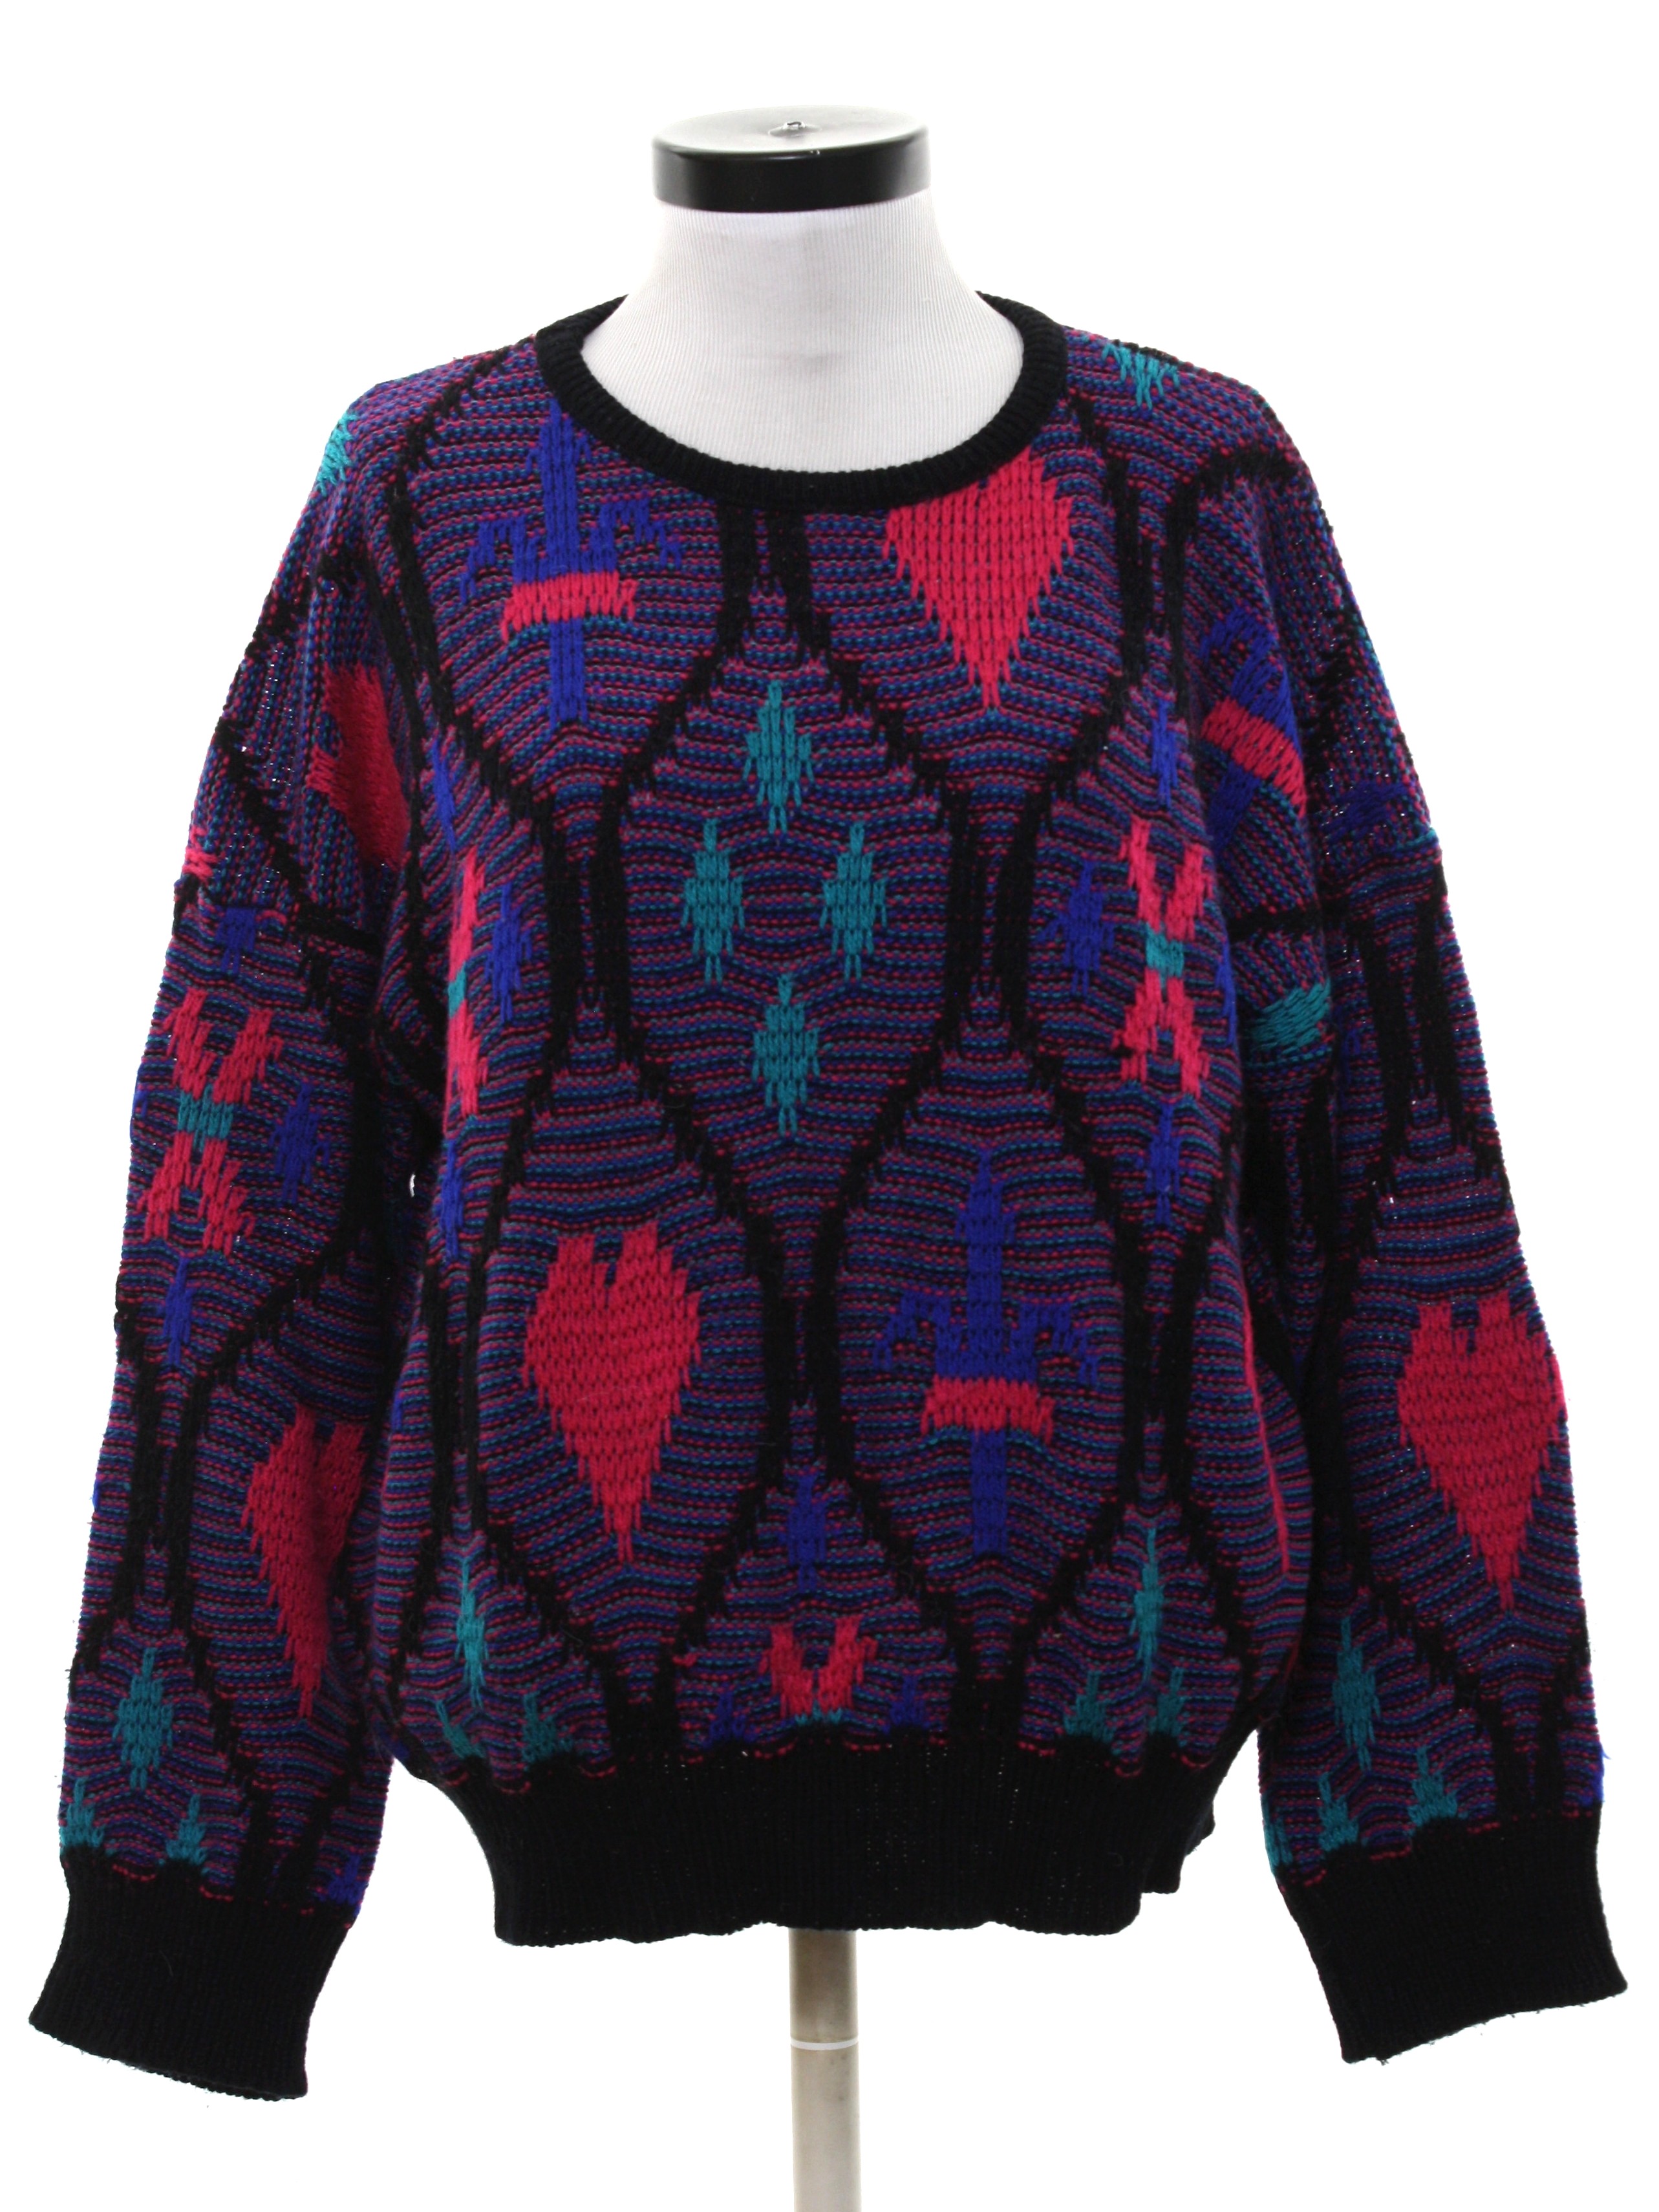 Retro 1980's Sweater (Western Connection) : 80s -Western Connection ...